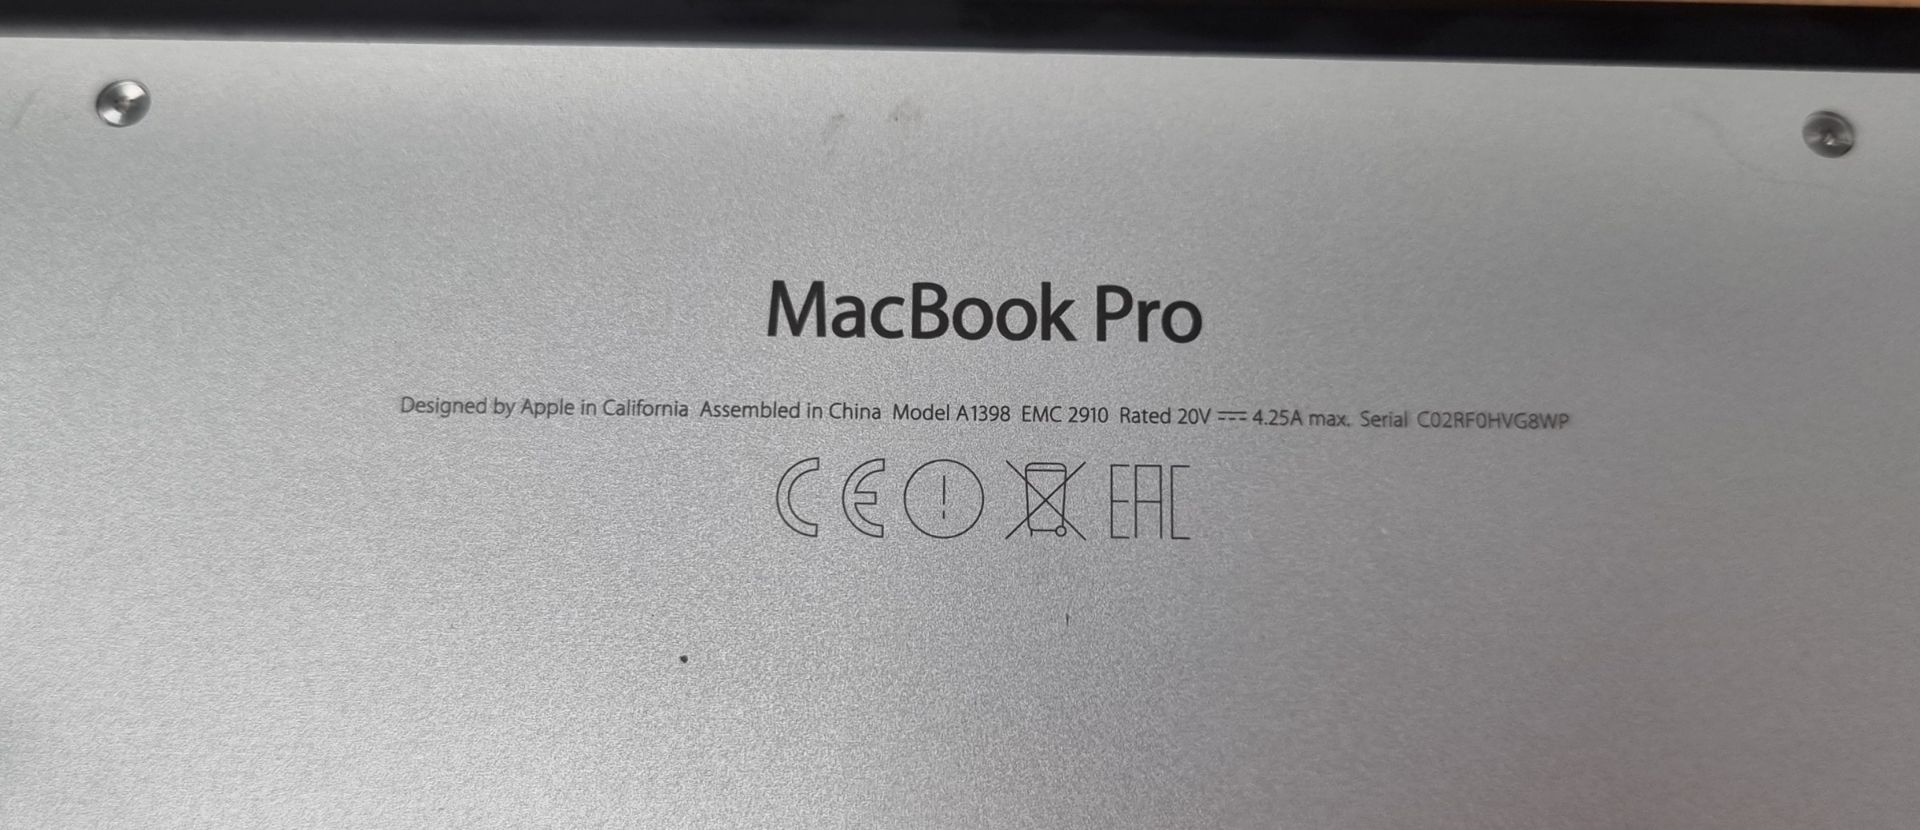 2015 15 inch Apple Macbook Pro - model number A1398 - charger included - Image 4 of 5